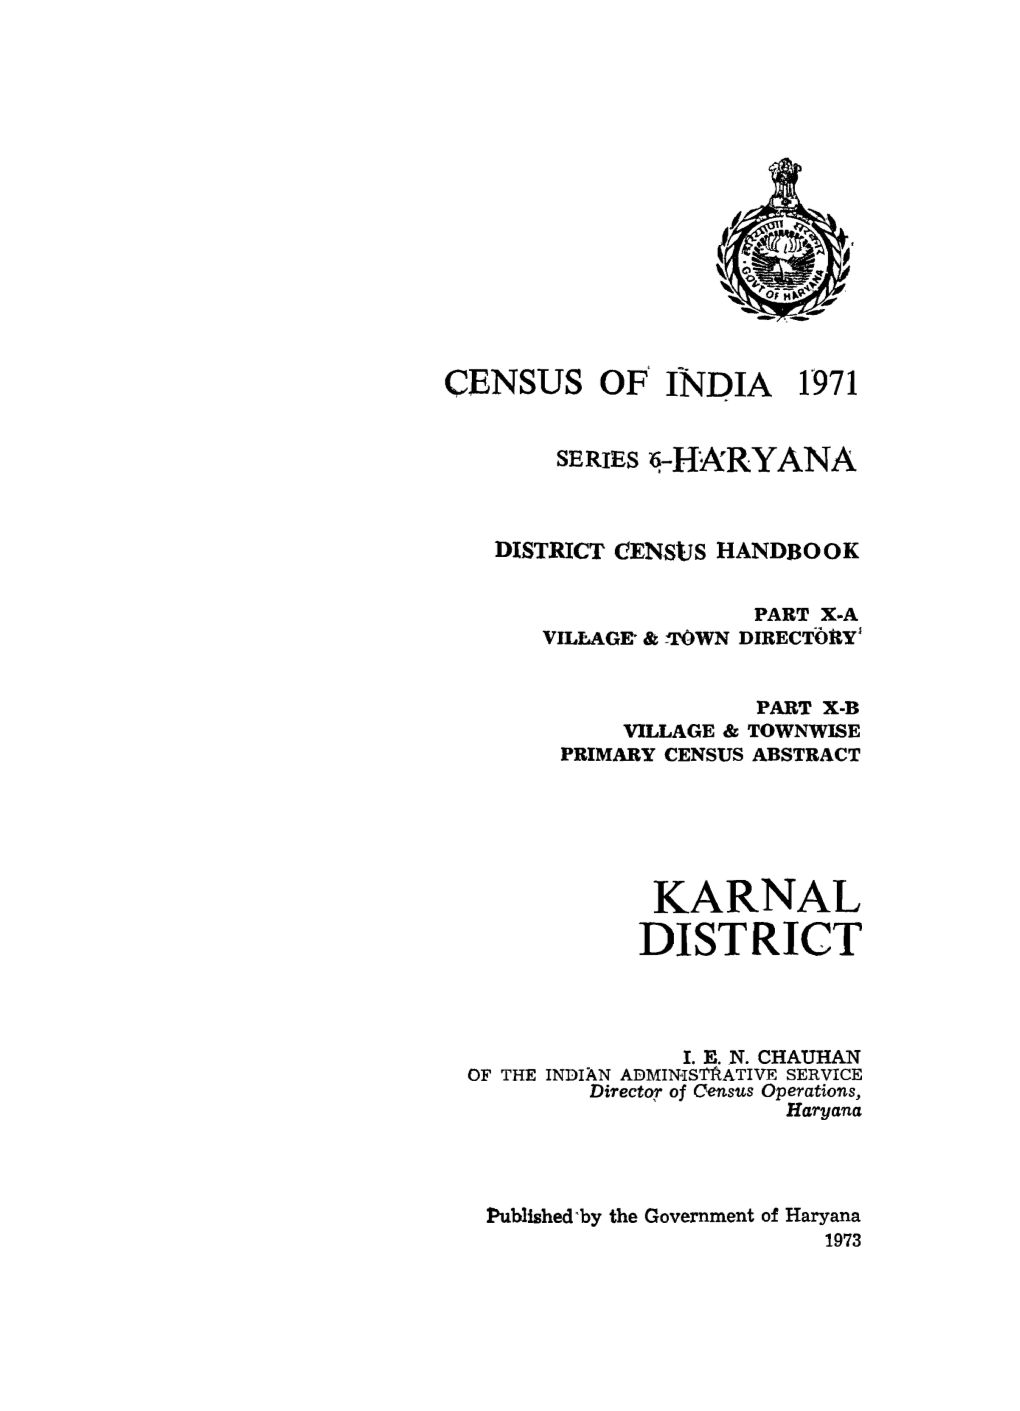 Village & Townwise Primary Census Abstract, Karnal, Pat X-B, A, Series